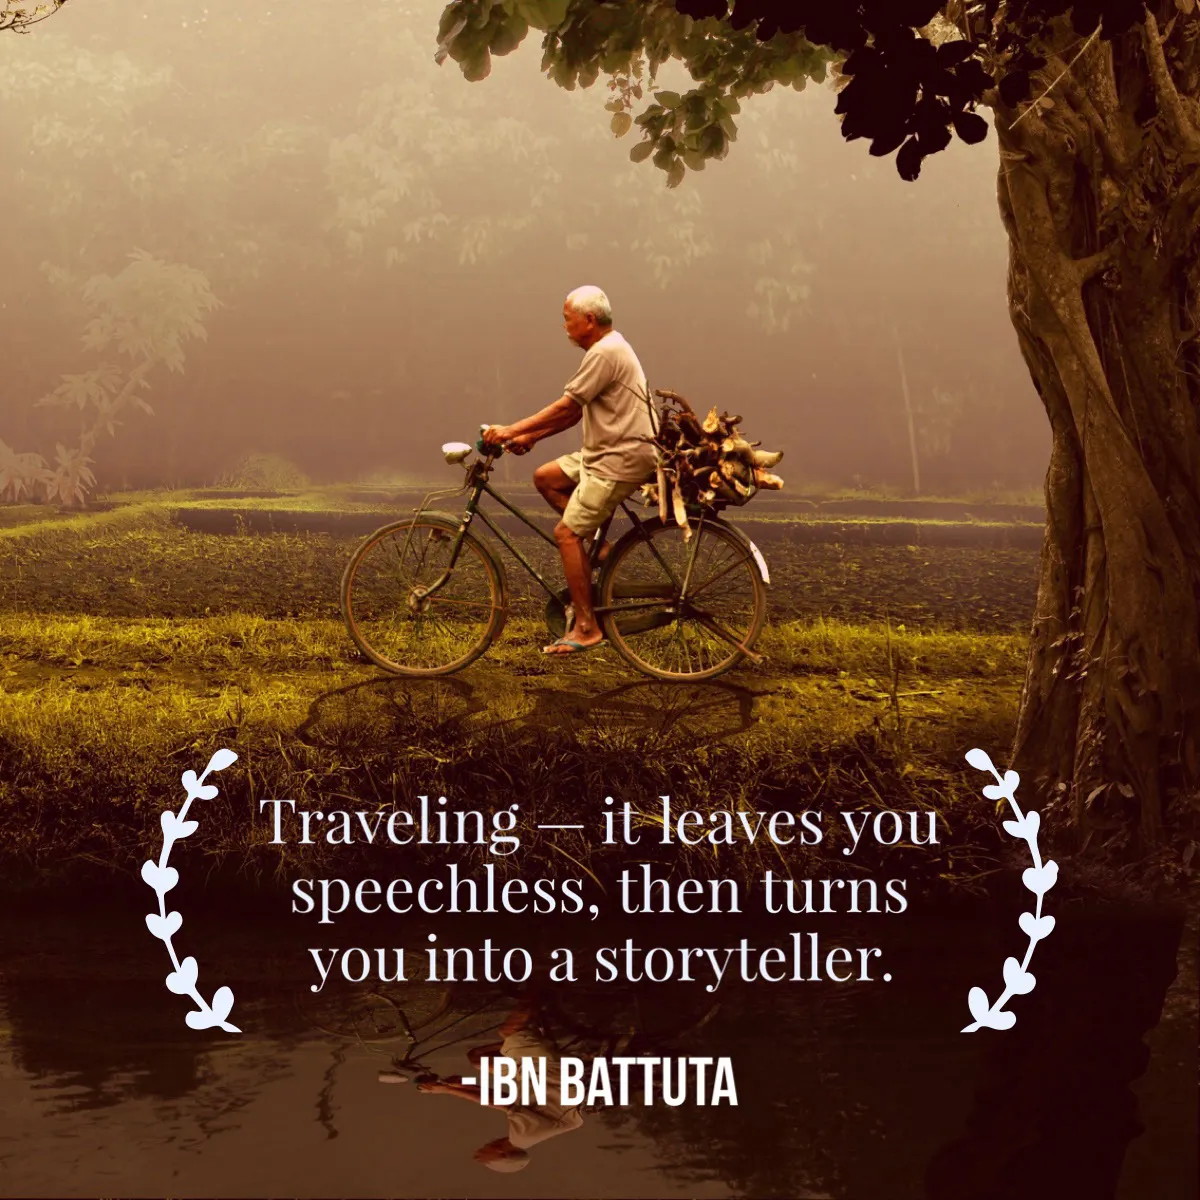 Traveling — it leaves you speechless, then turns you into a storyteller.